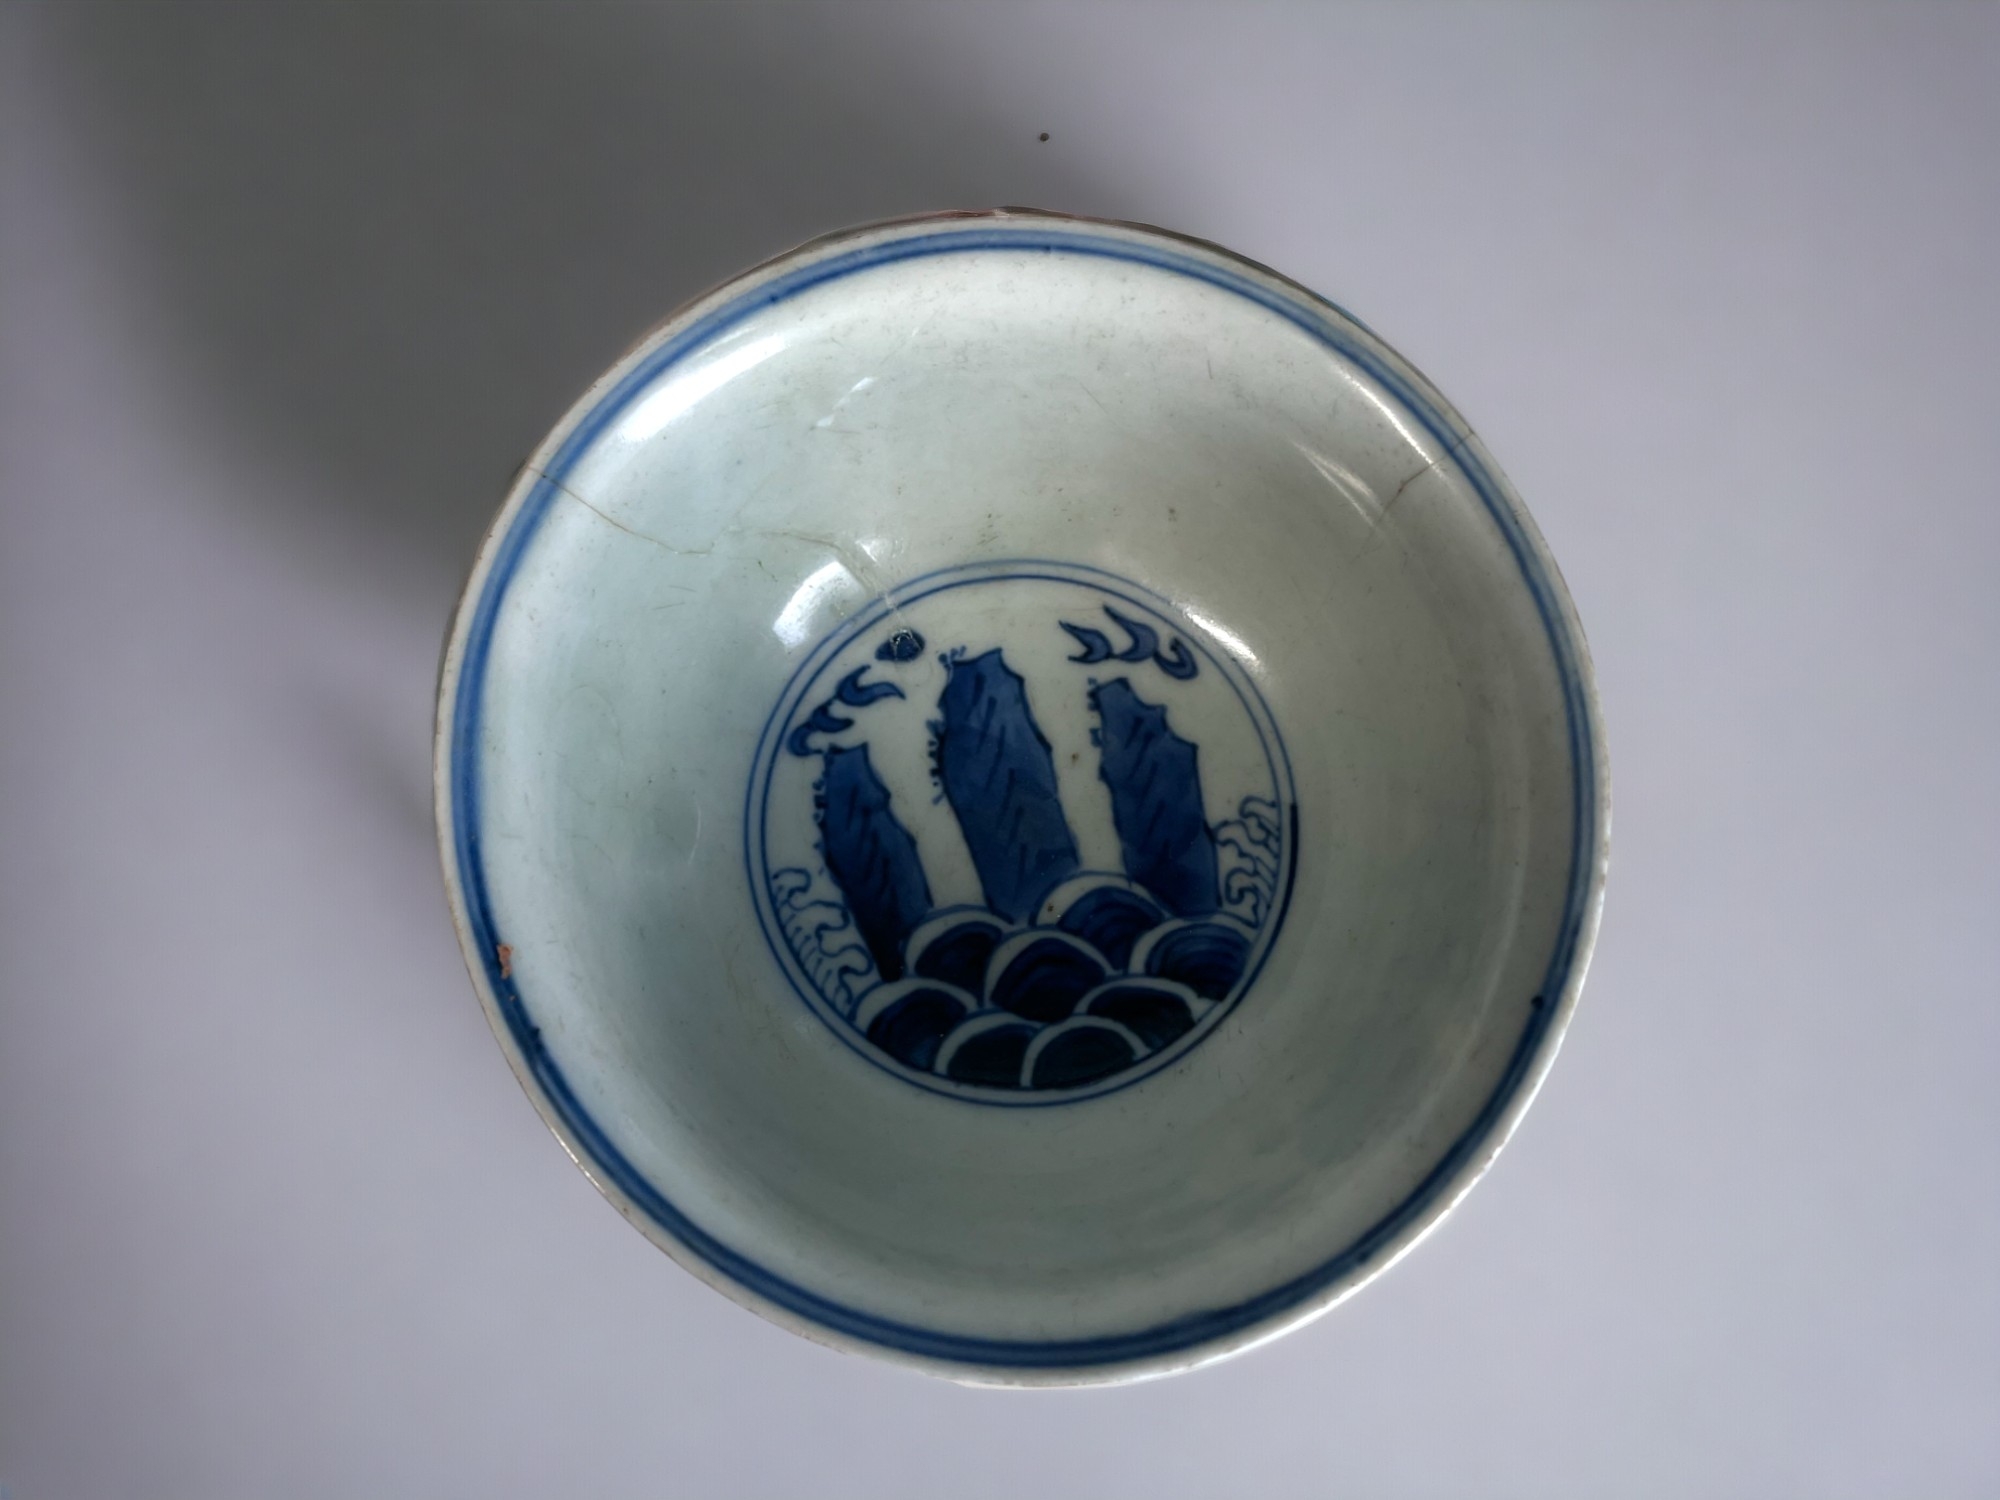 A CHINESE BLUE & WHITE PORCELAIN BOWL. Painted in the Kangxi style, depicting mythical Horse, - Image 4 of 5